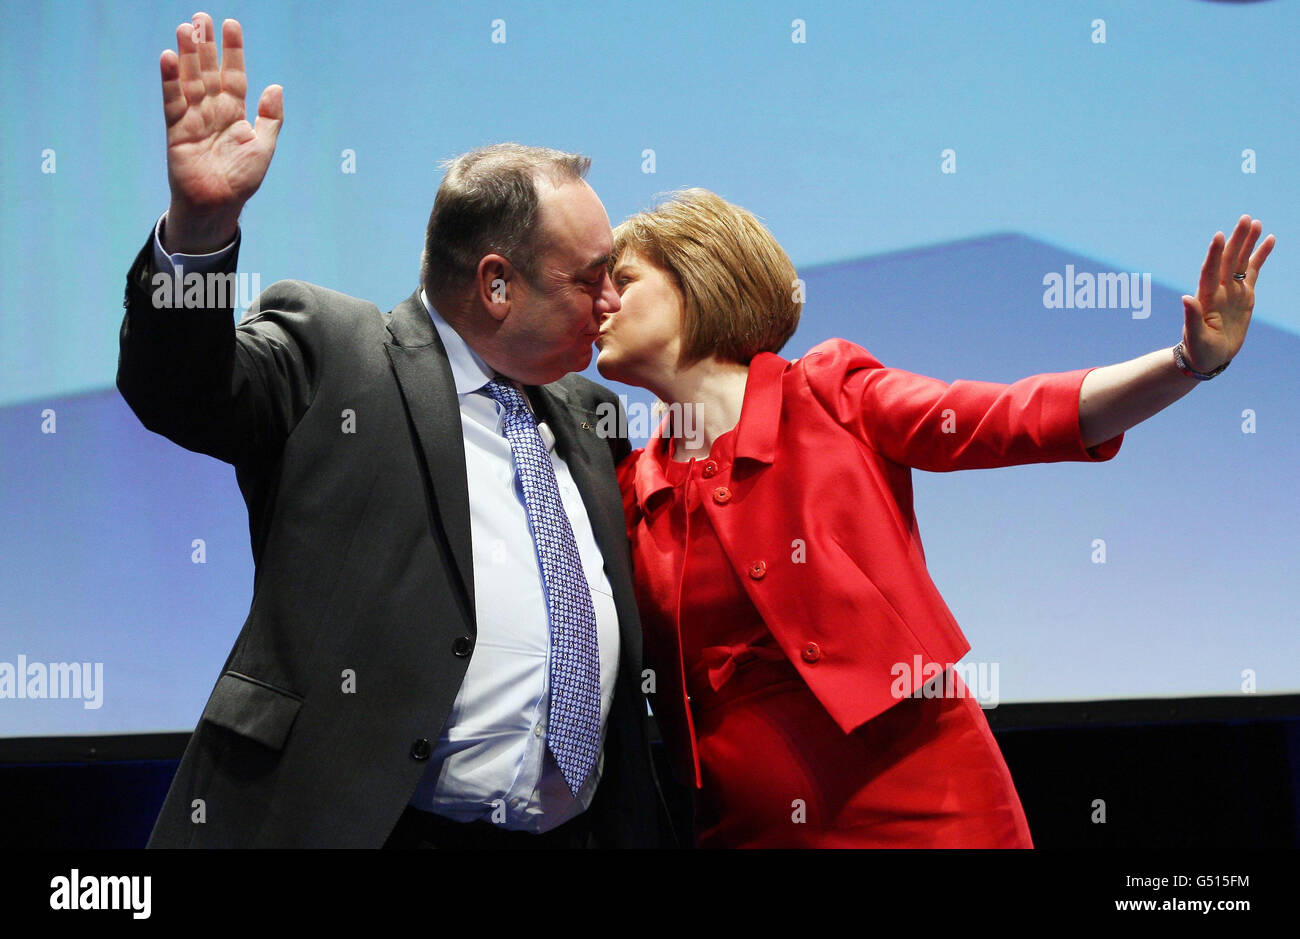 Scottish National Party leader Alex Salmond and his deputy Nicola Sturgeon close the Scottish National Party Conference in Glasgow. Stock Photo